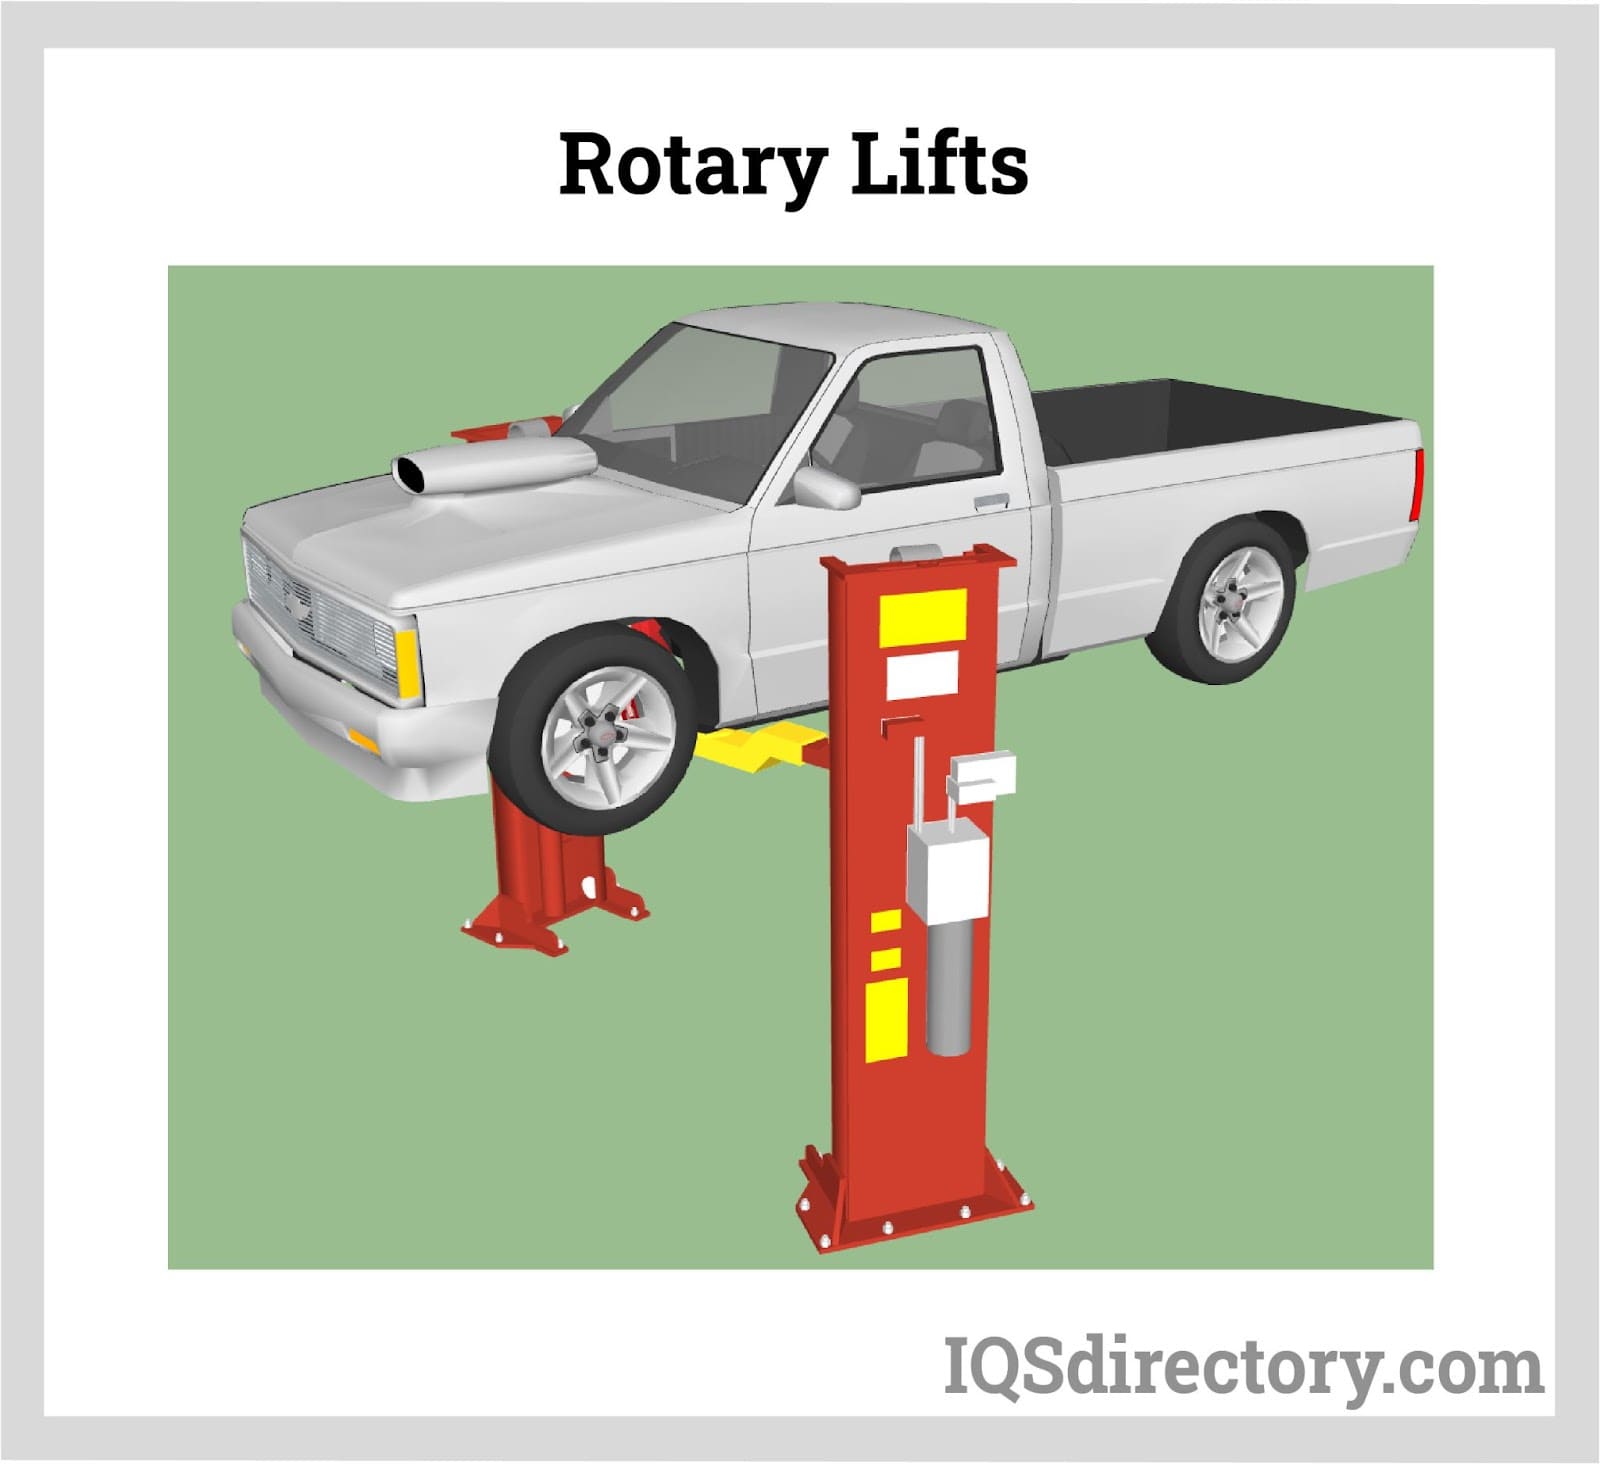 Rotary Lifts